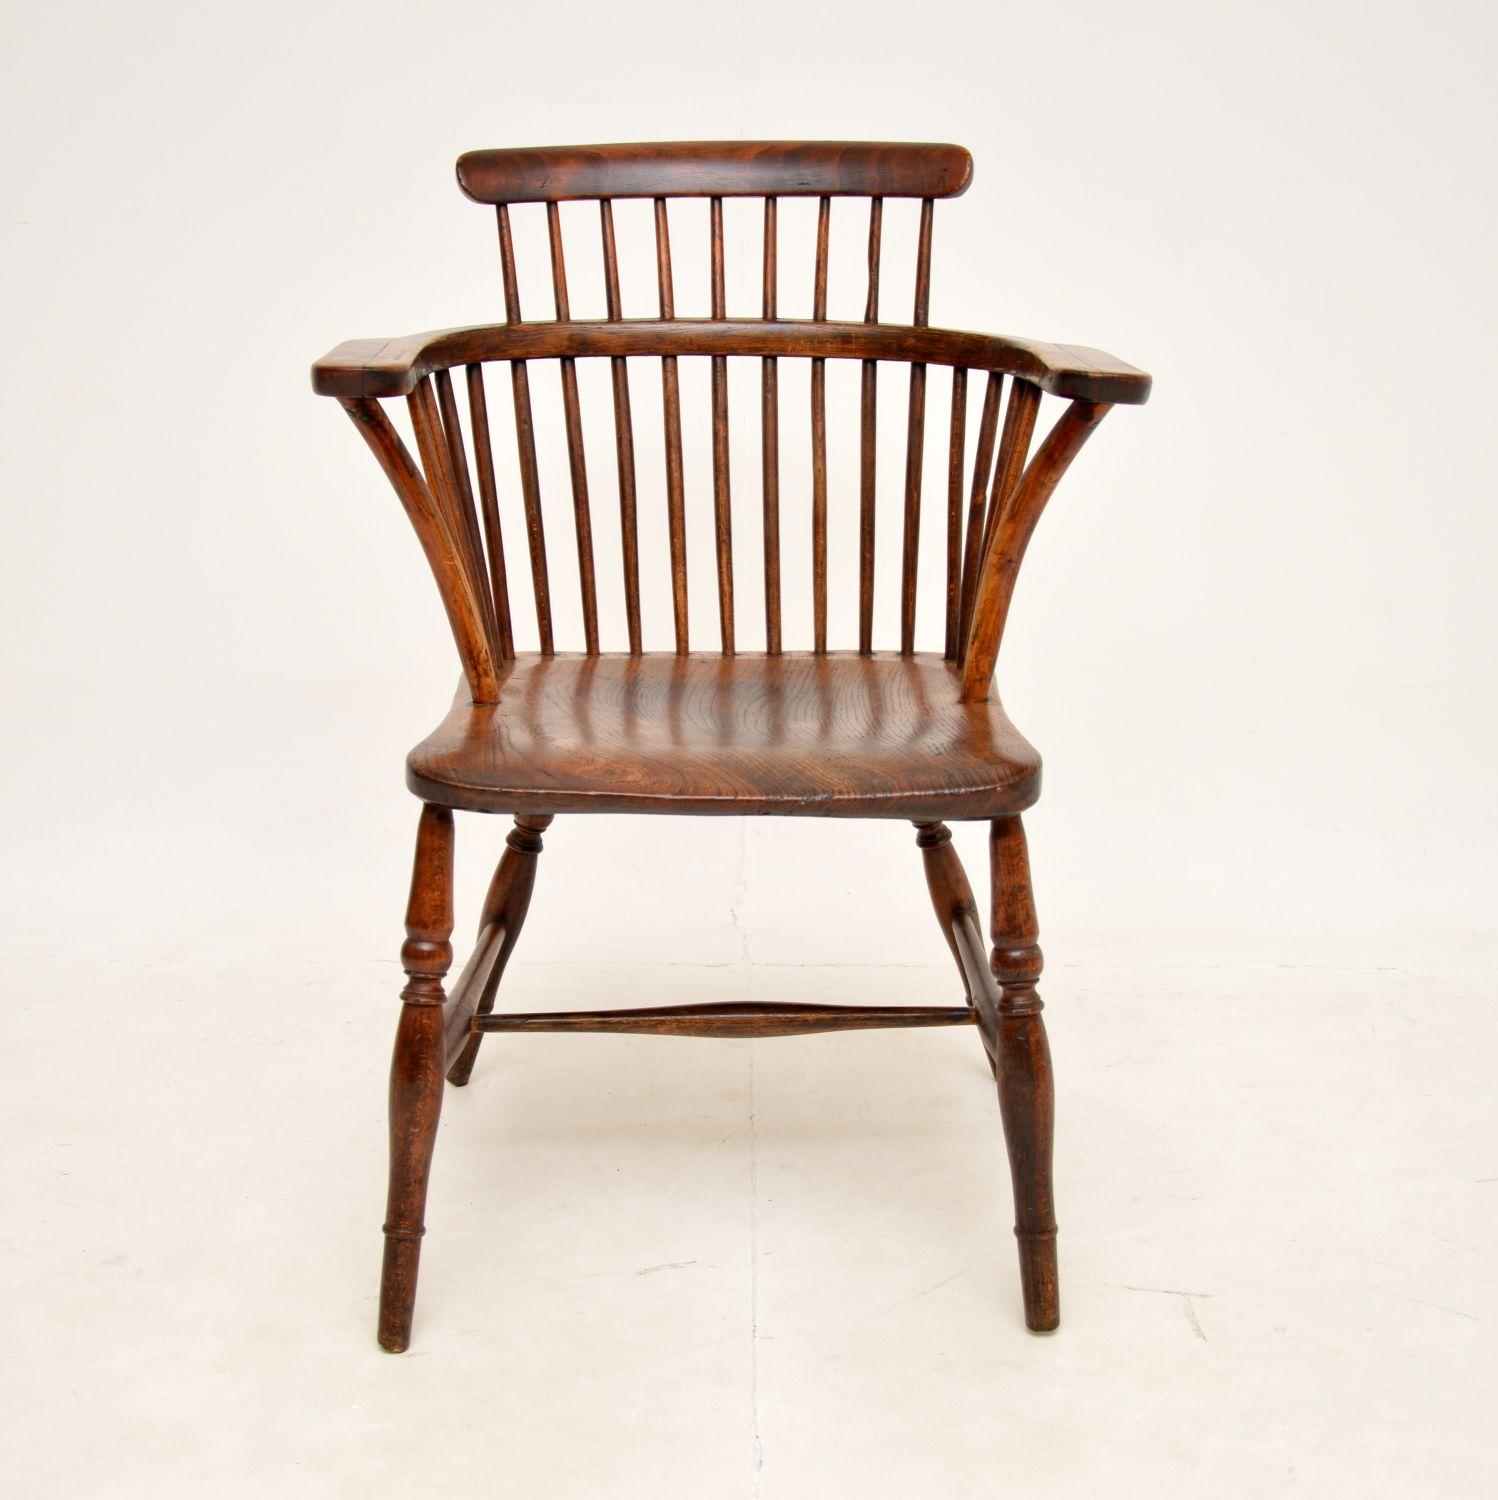 A fantastic original early 19th century Comb Back Windsor chair in solid elm. This was made in England, it dates from the 1820’s period.

It is of super quality with a beautiful design, very elegant yet sturdy. The turned legs have a turned